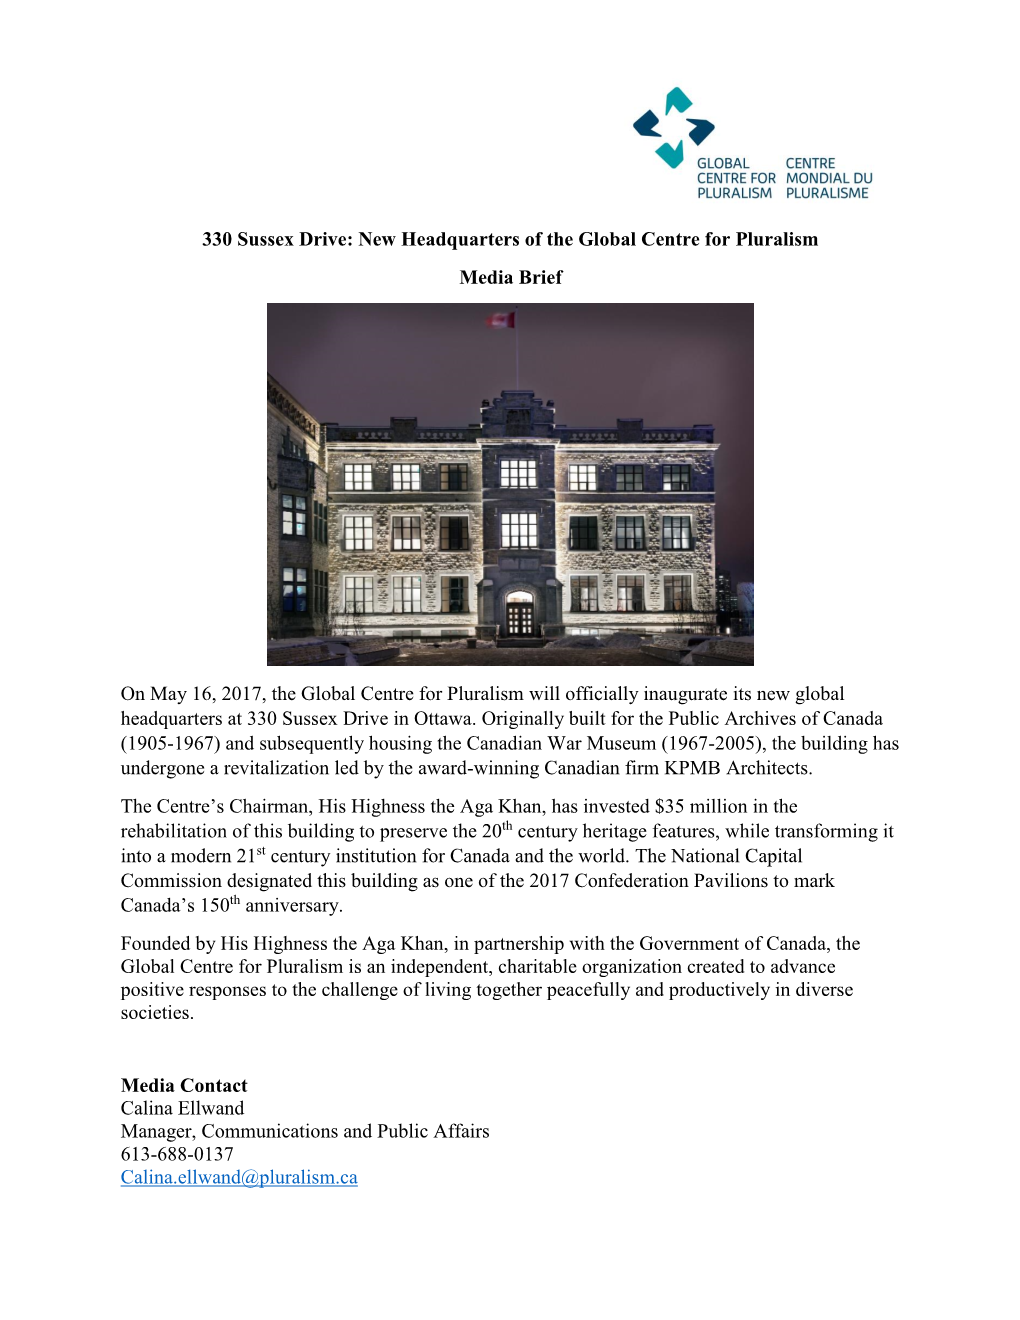 330 Sussex Drive: New Headquarters of the Global Centre for Pluralism Media Brief